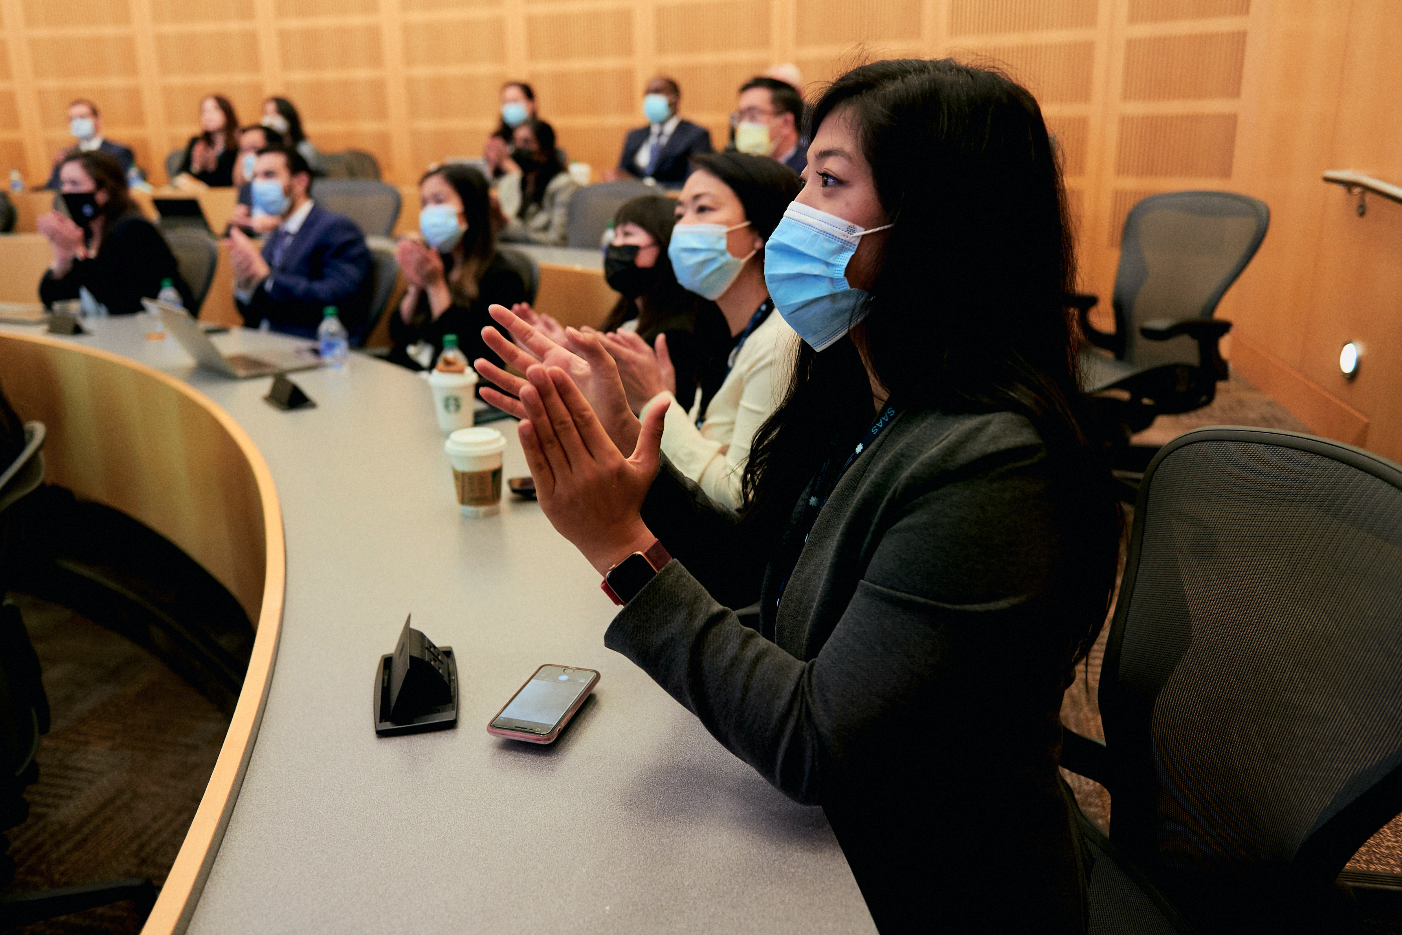 Dr. Connie Shao and trainees clapping